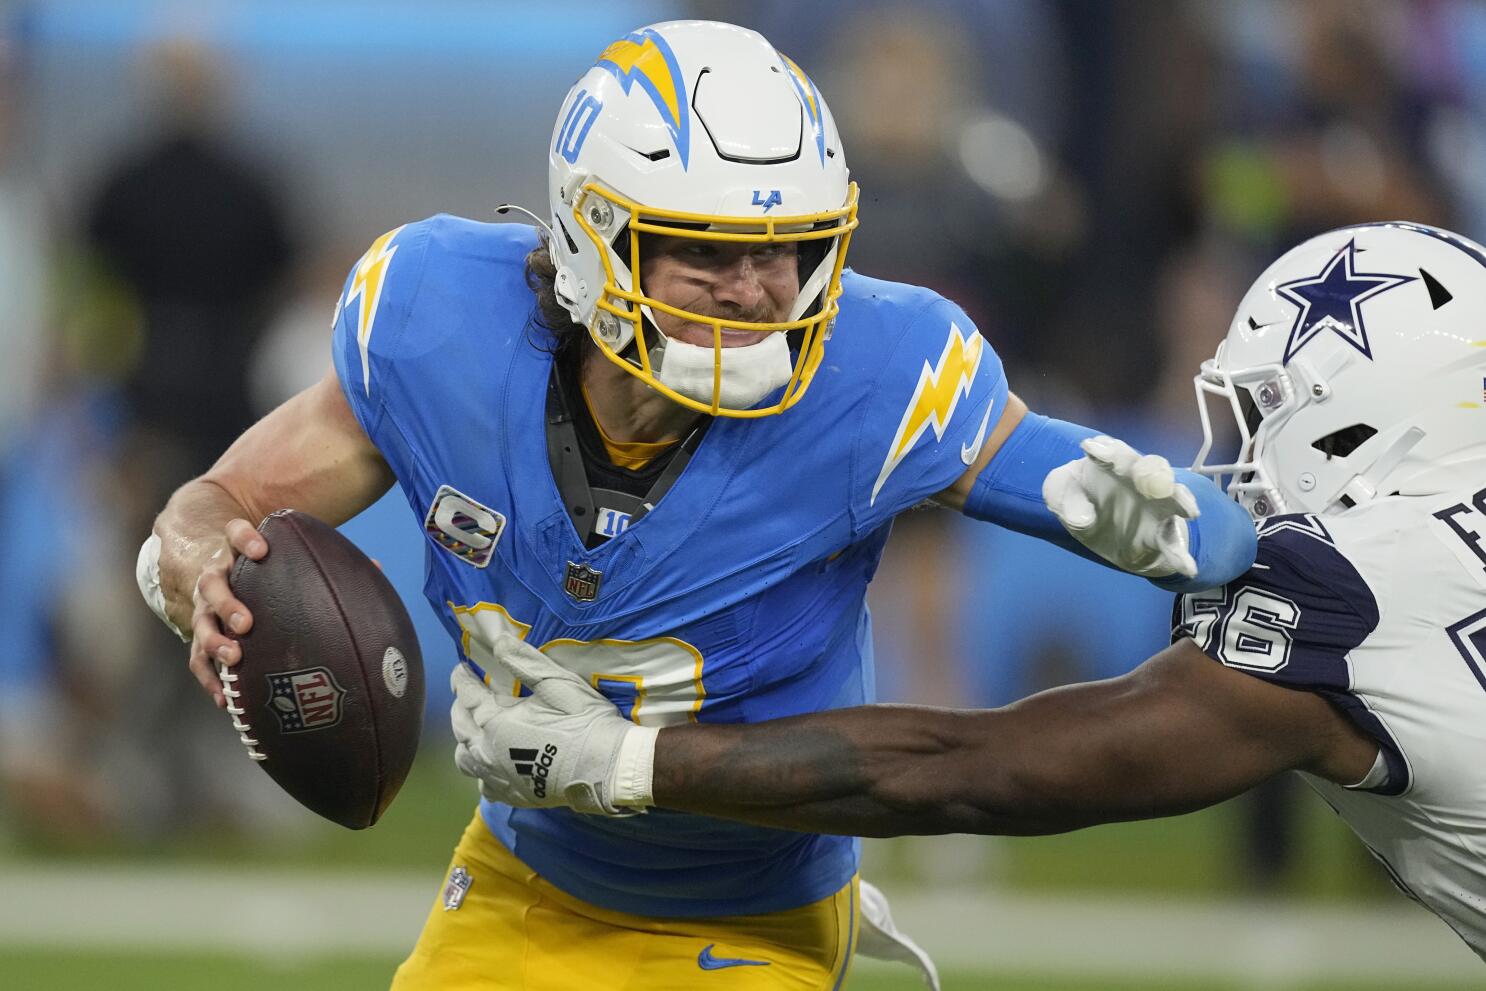 The Chargers are going back to powder blue uniforms, but not back to San  Diego - The Washington Post